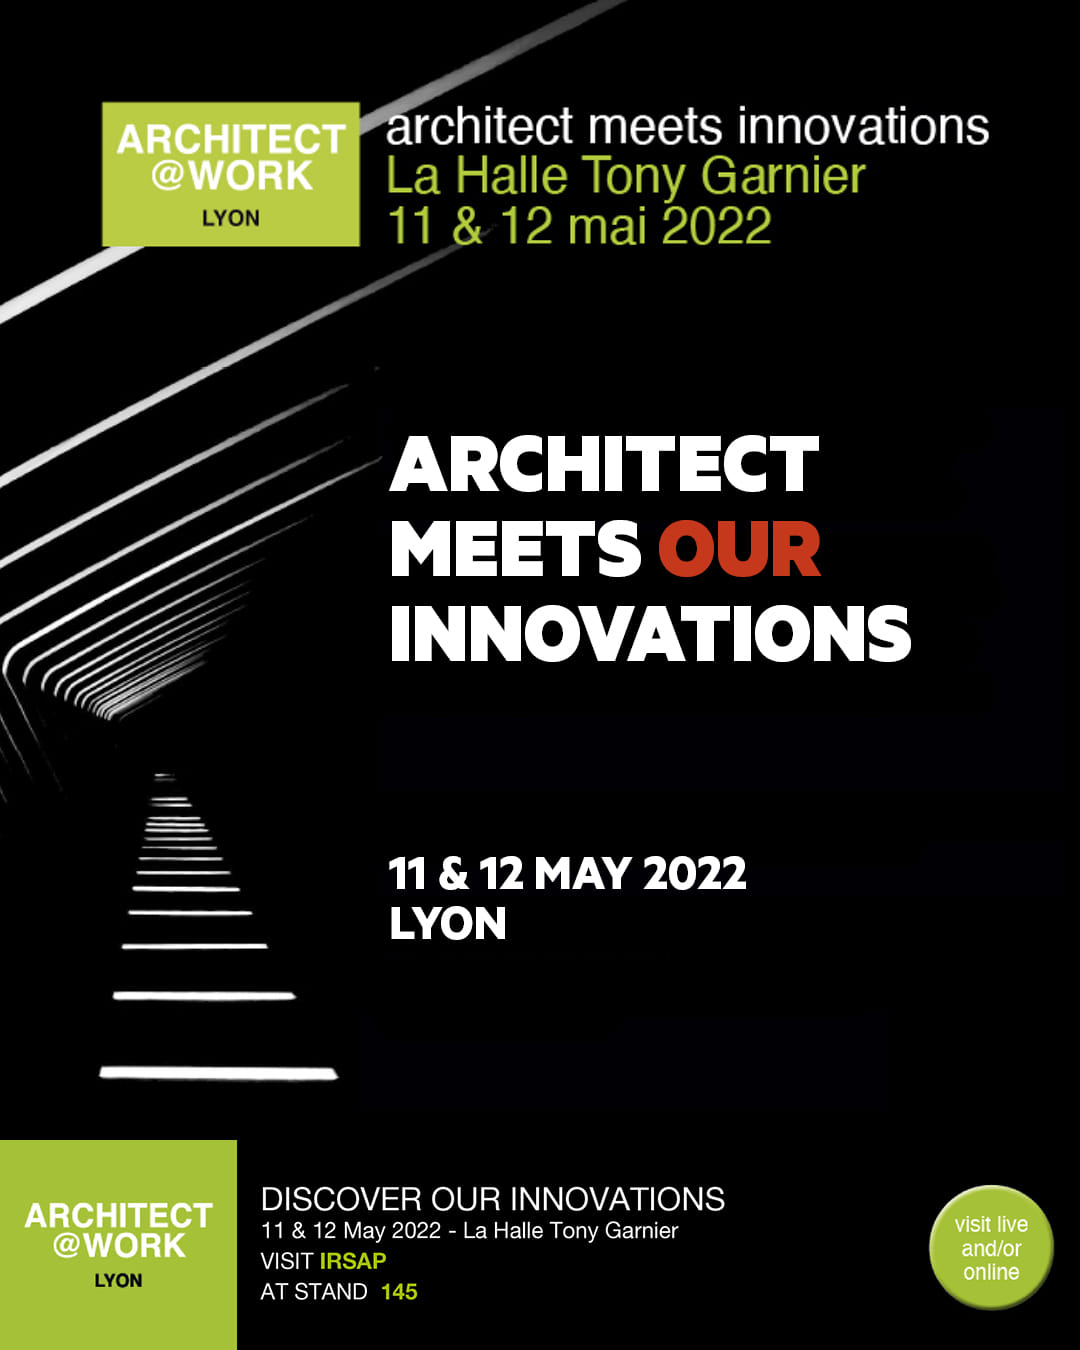 Architect meets innovations